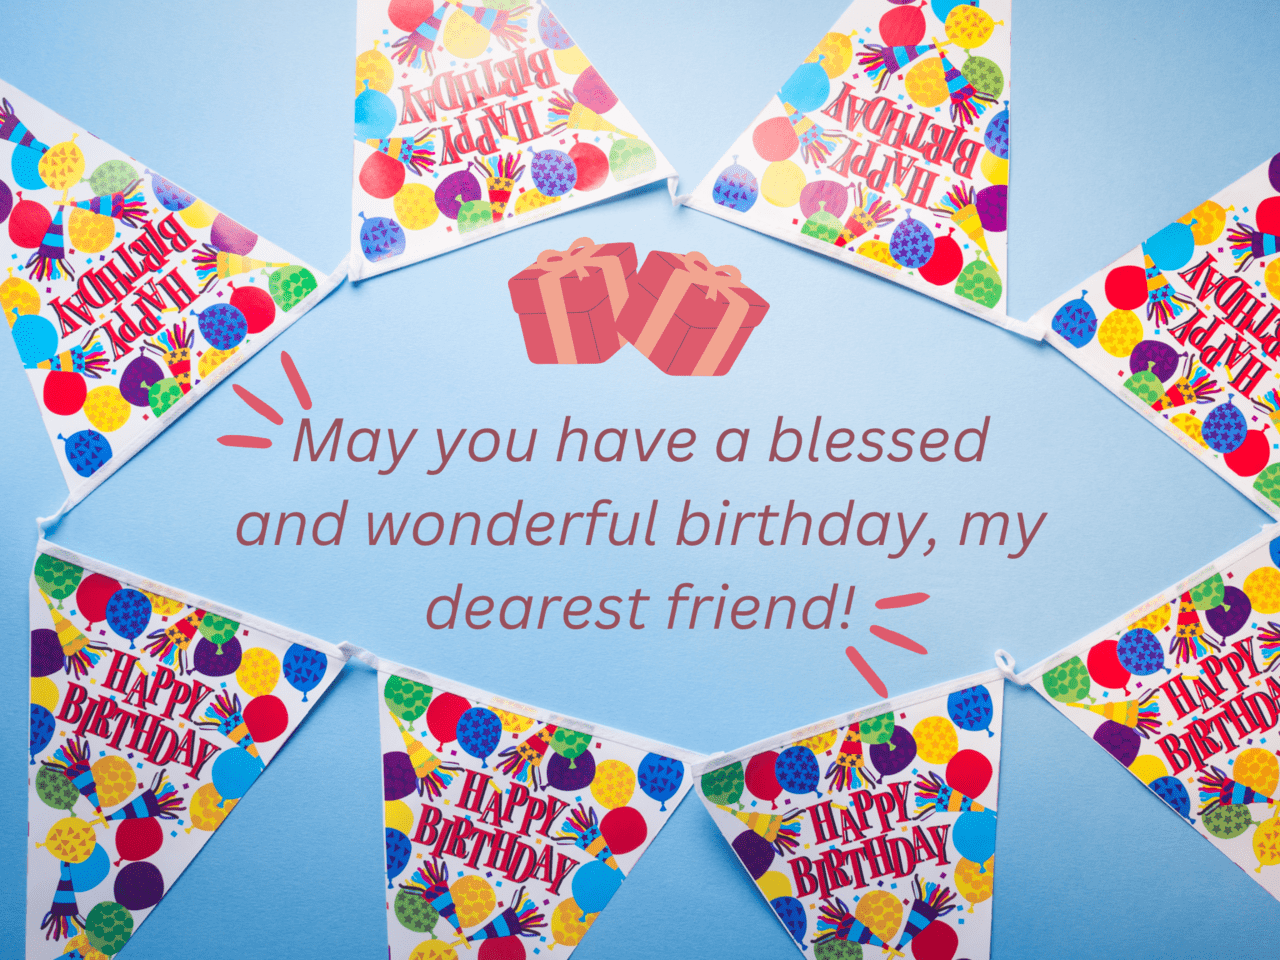 may you have a blessed and wonderful birthday, my dearest friend!